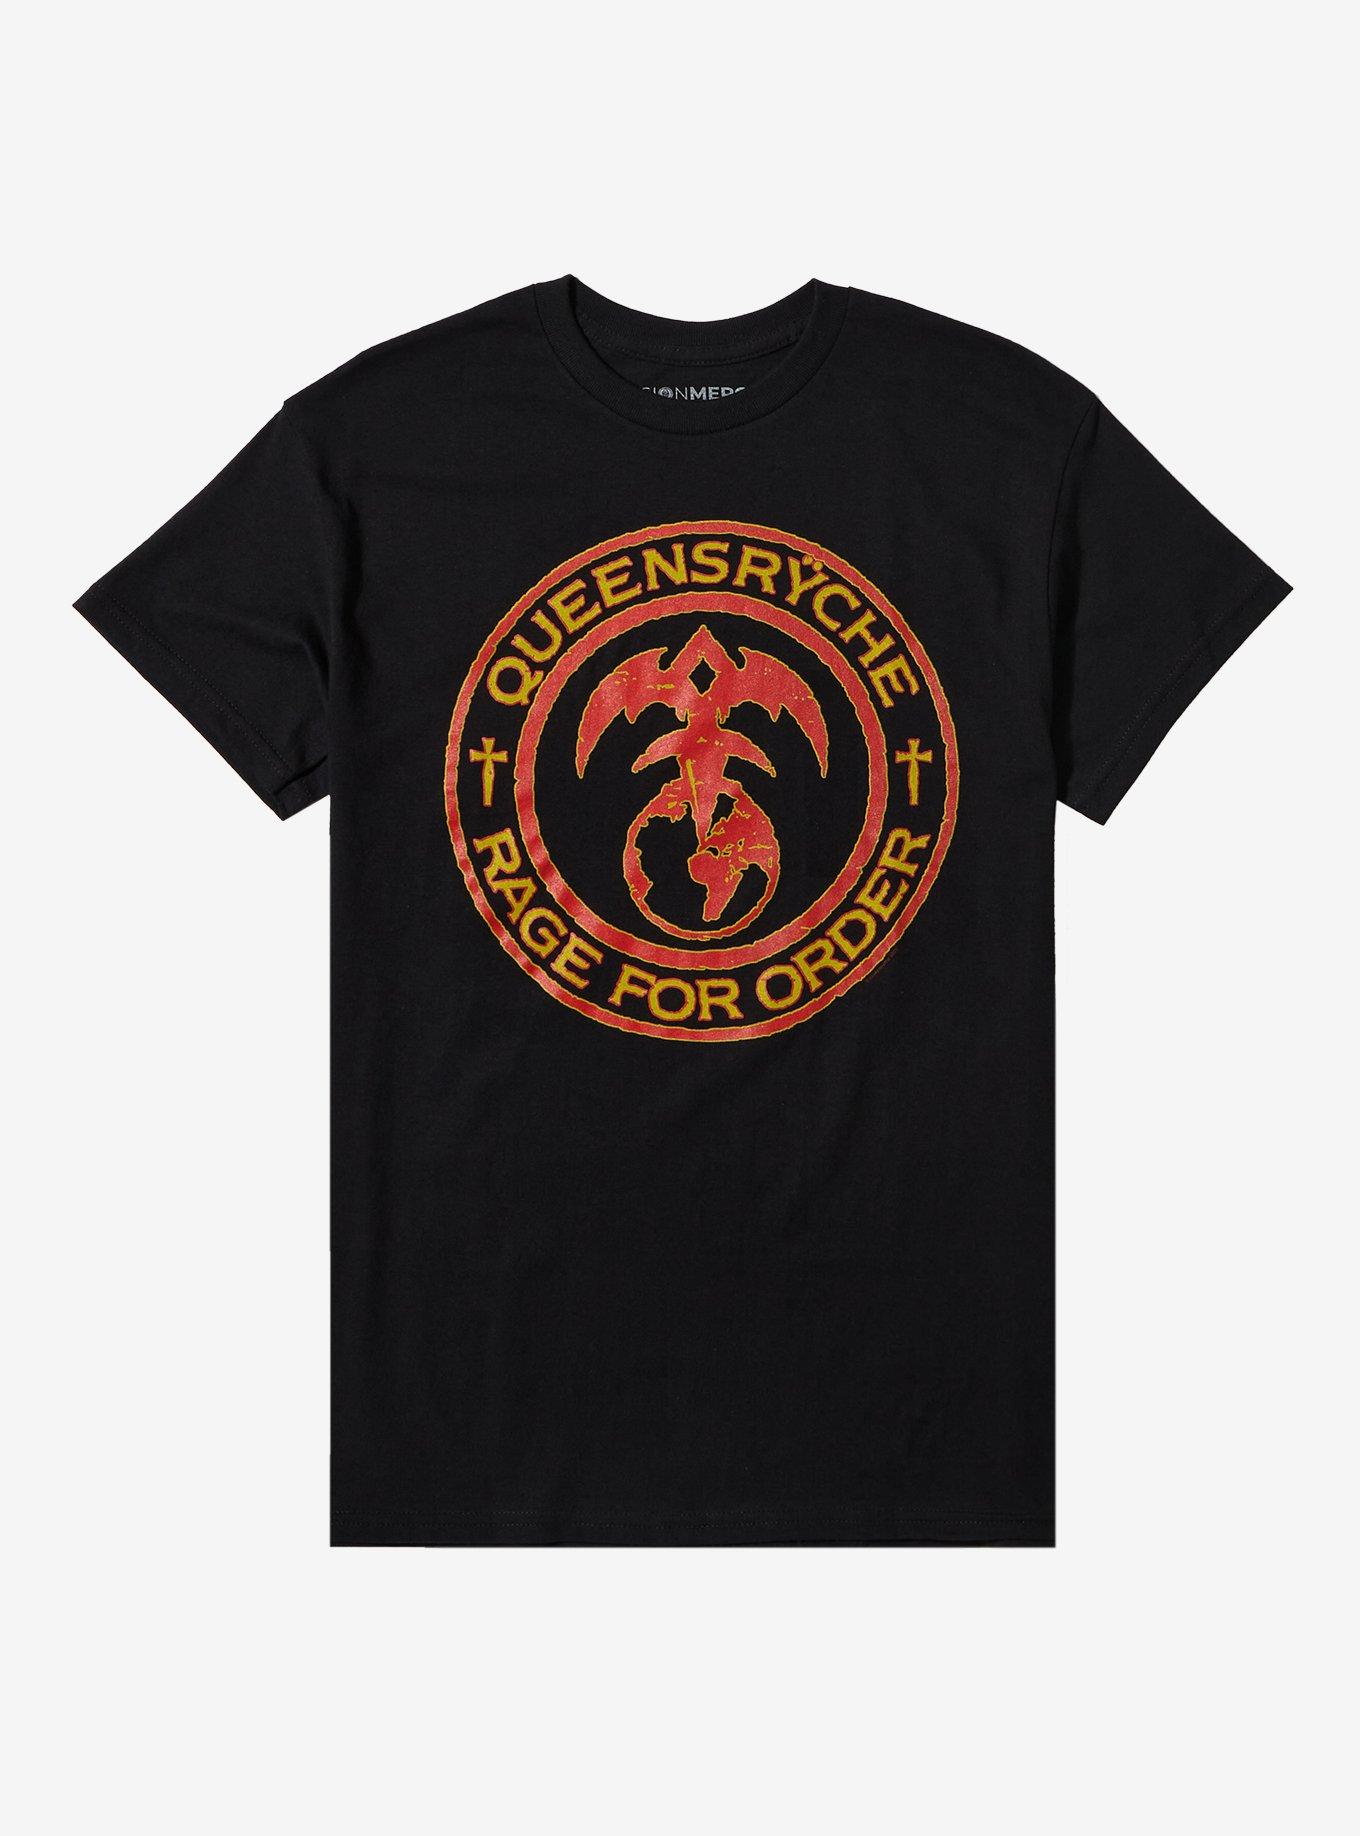 Queensryche Rage For Order Tour T-Shirt